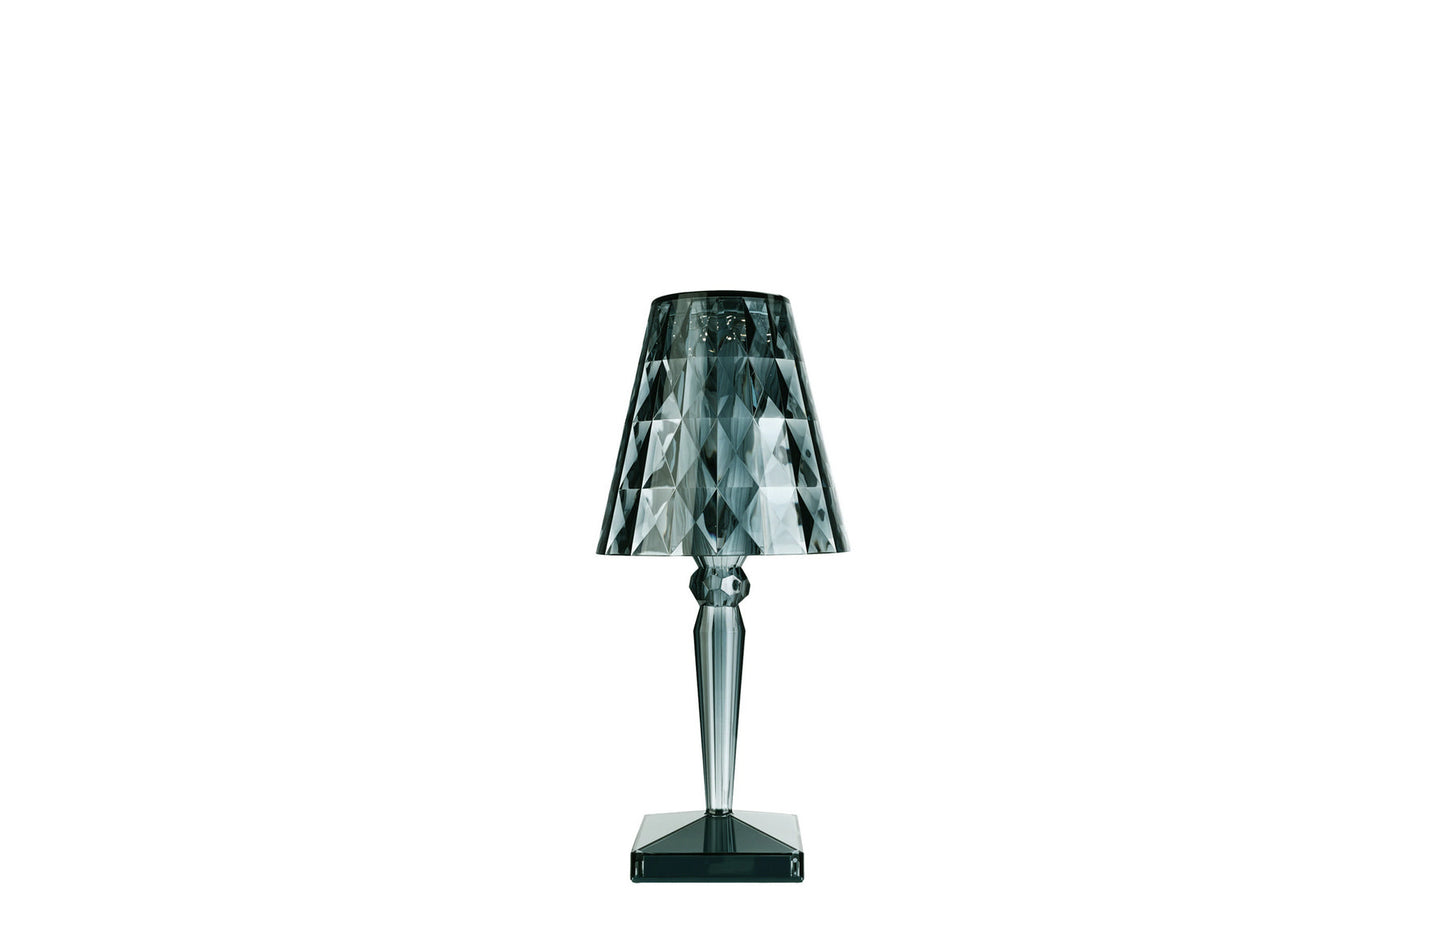 Big Battery Indoor Table Lamp - Direct Power
